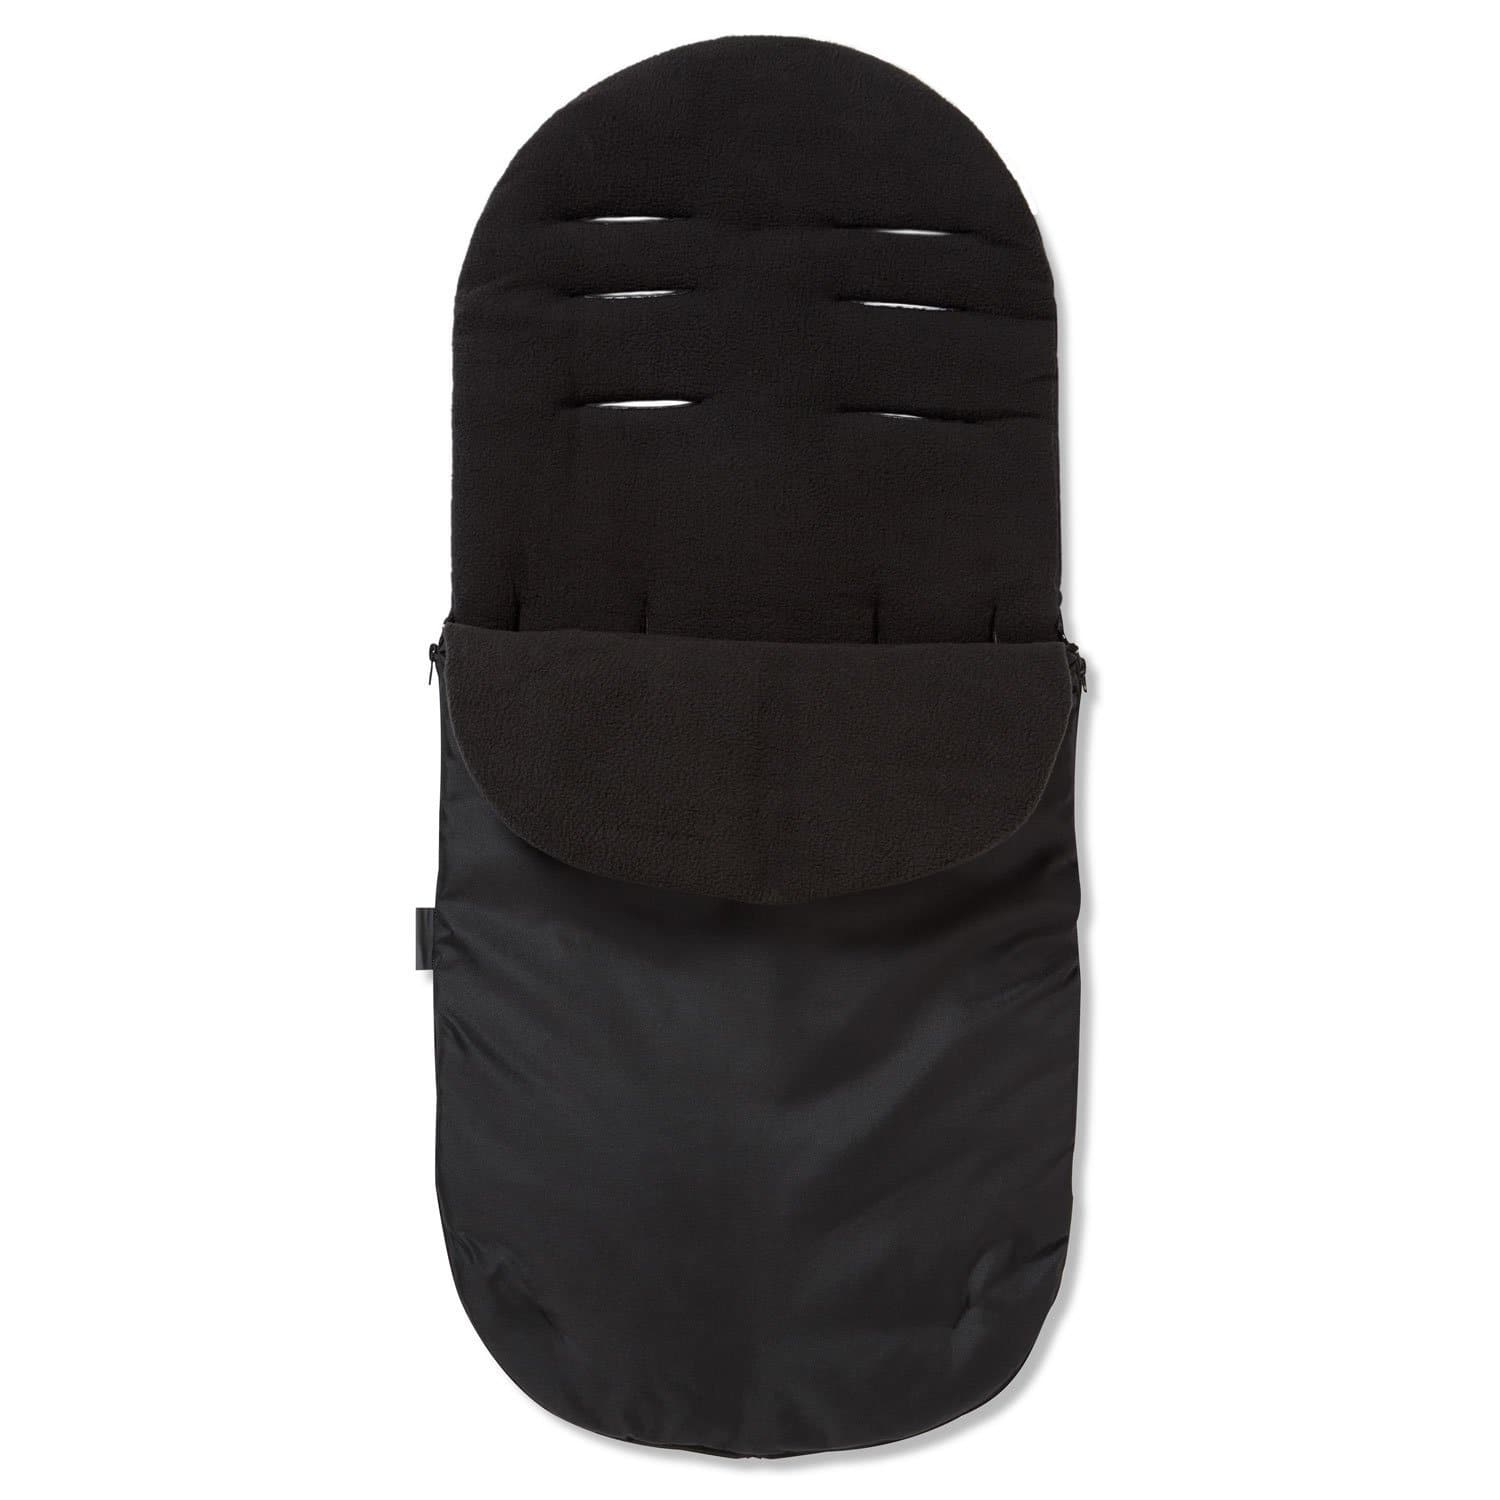 Footmuff / Cosy Toes Compatible with Mountain Buggy - Black / Fits All Models | For Your Little One